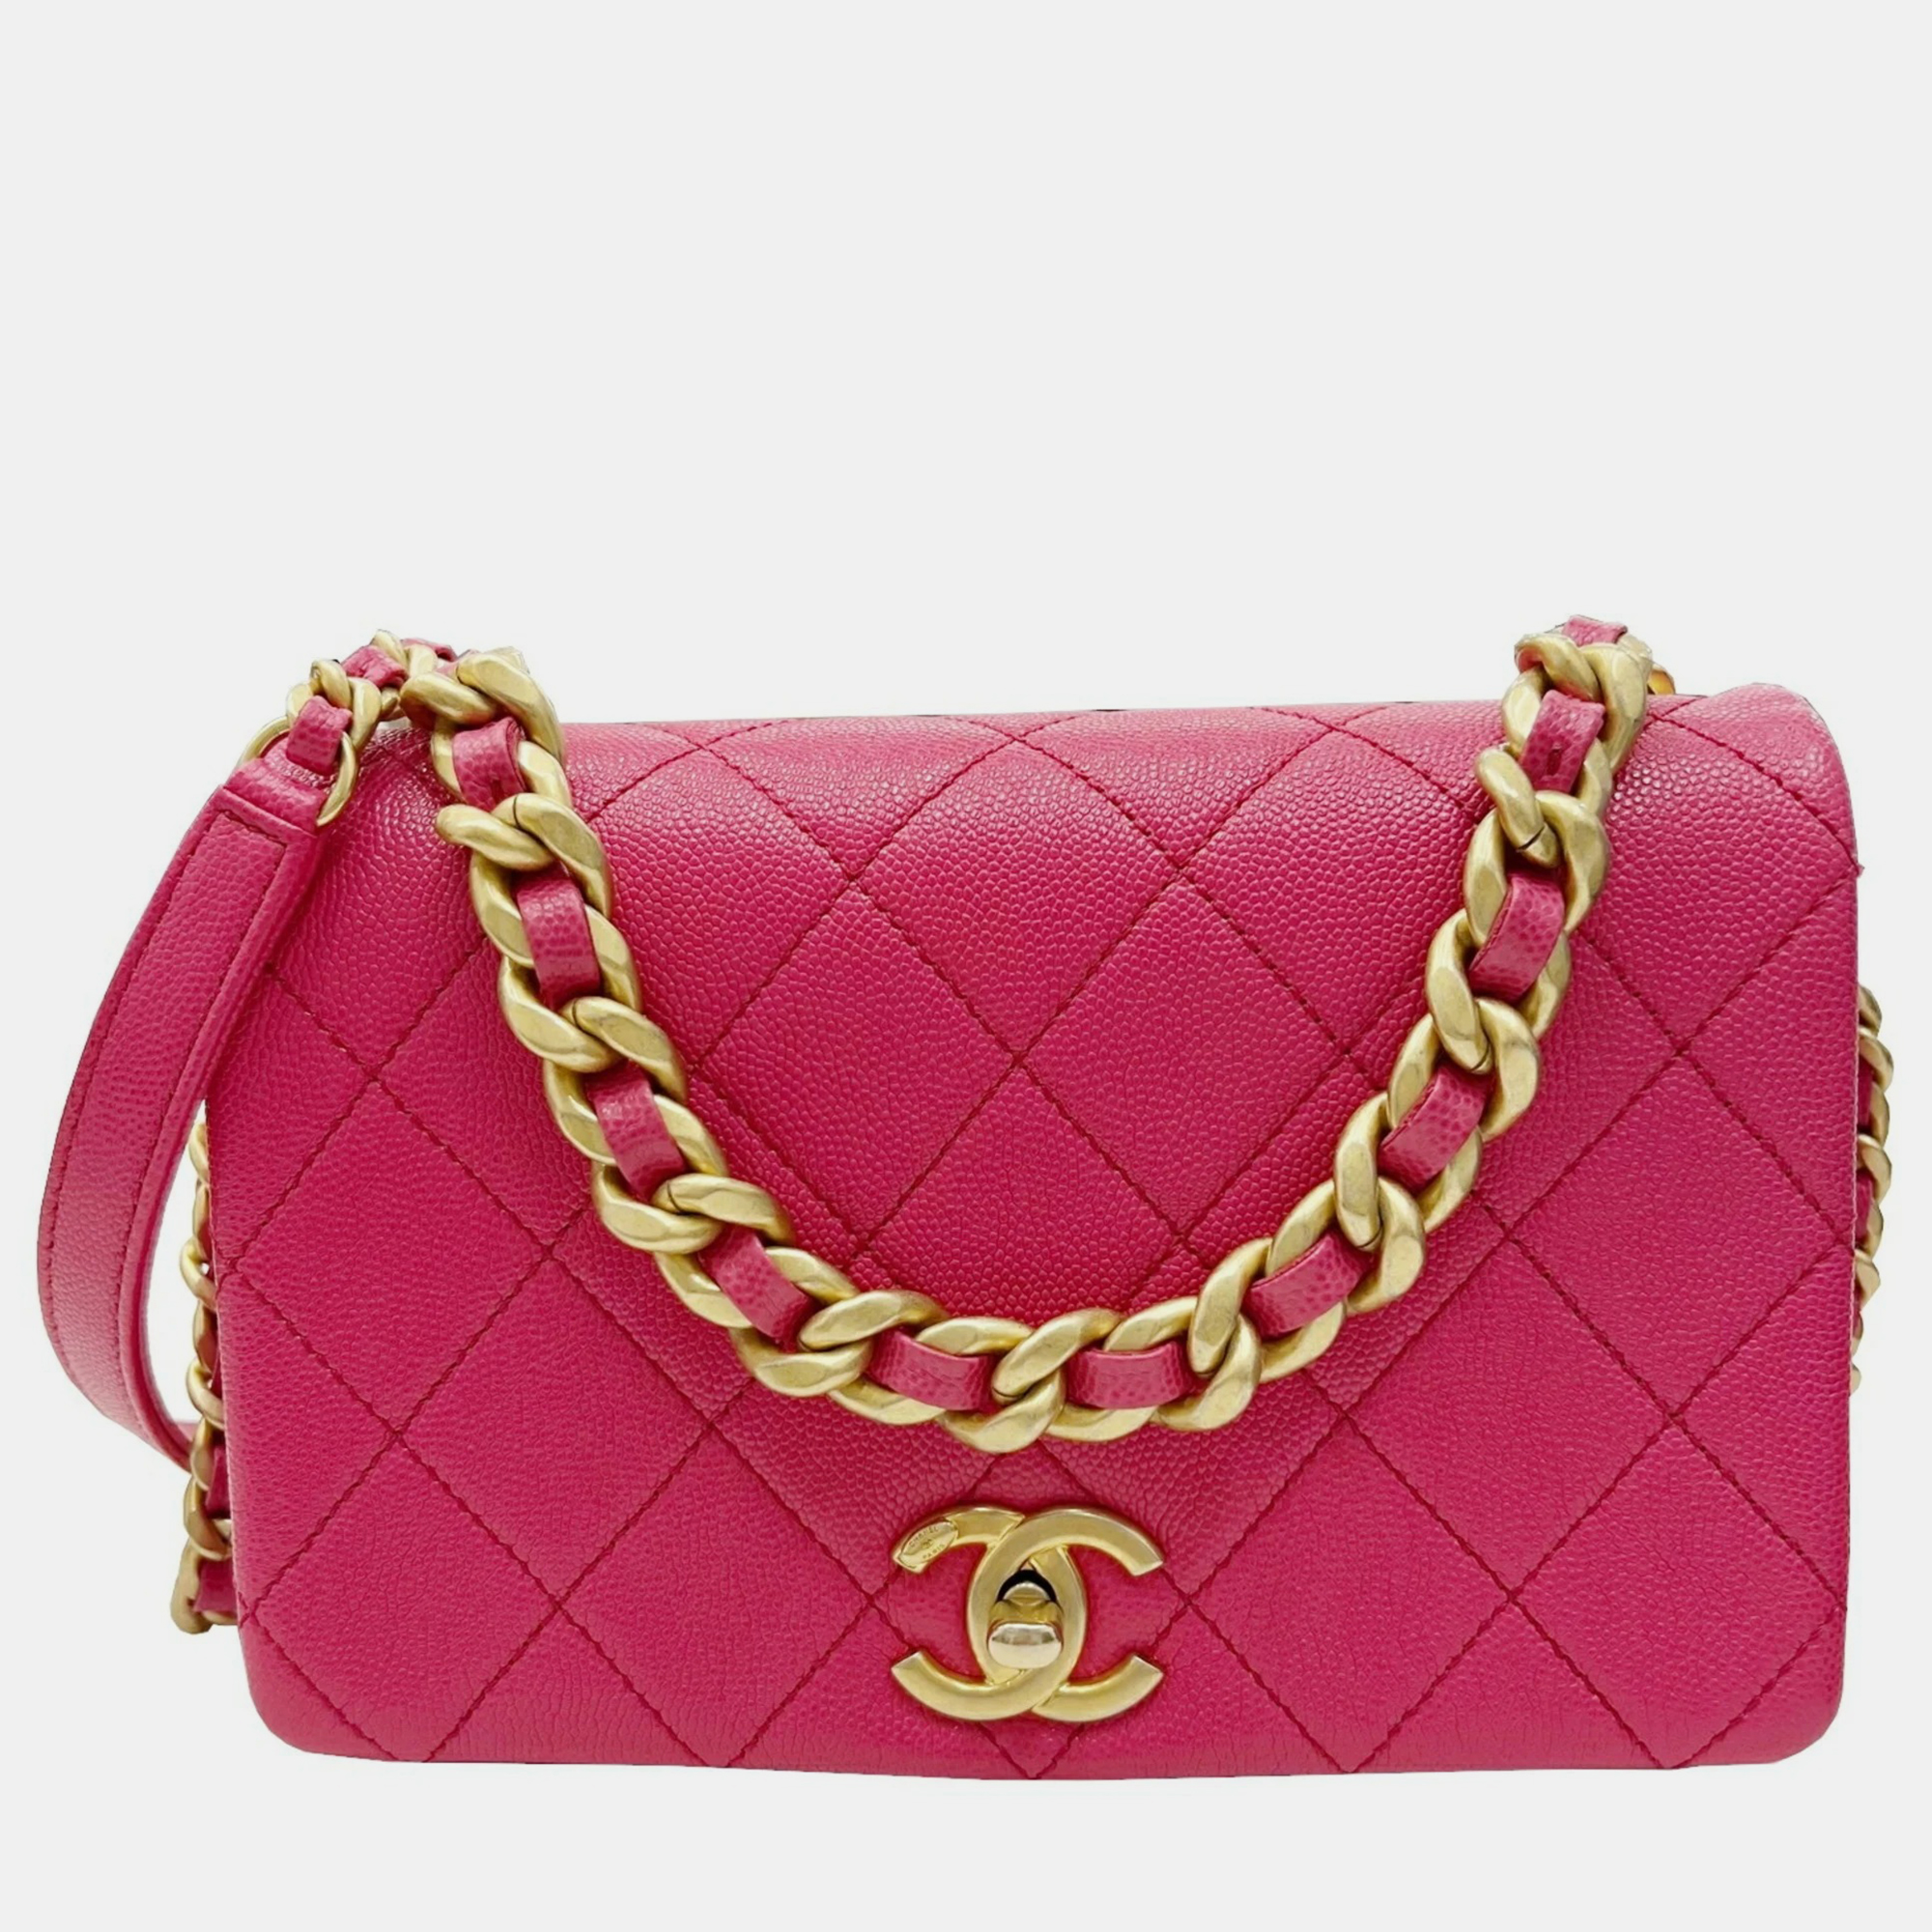 Chanel pink leather fashion therapy flap bag